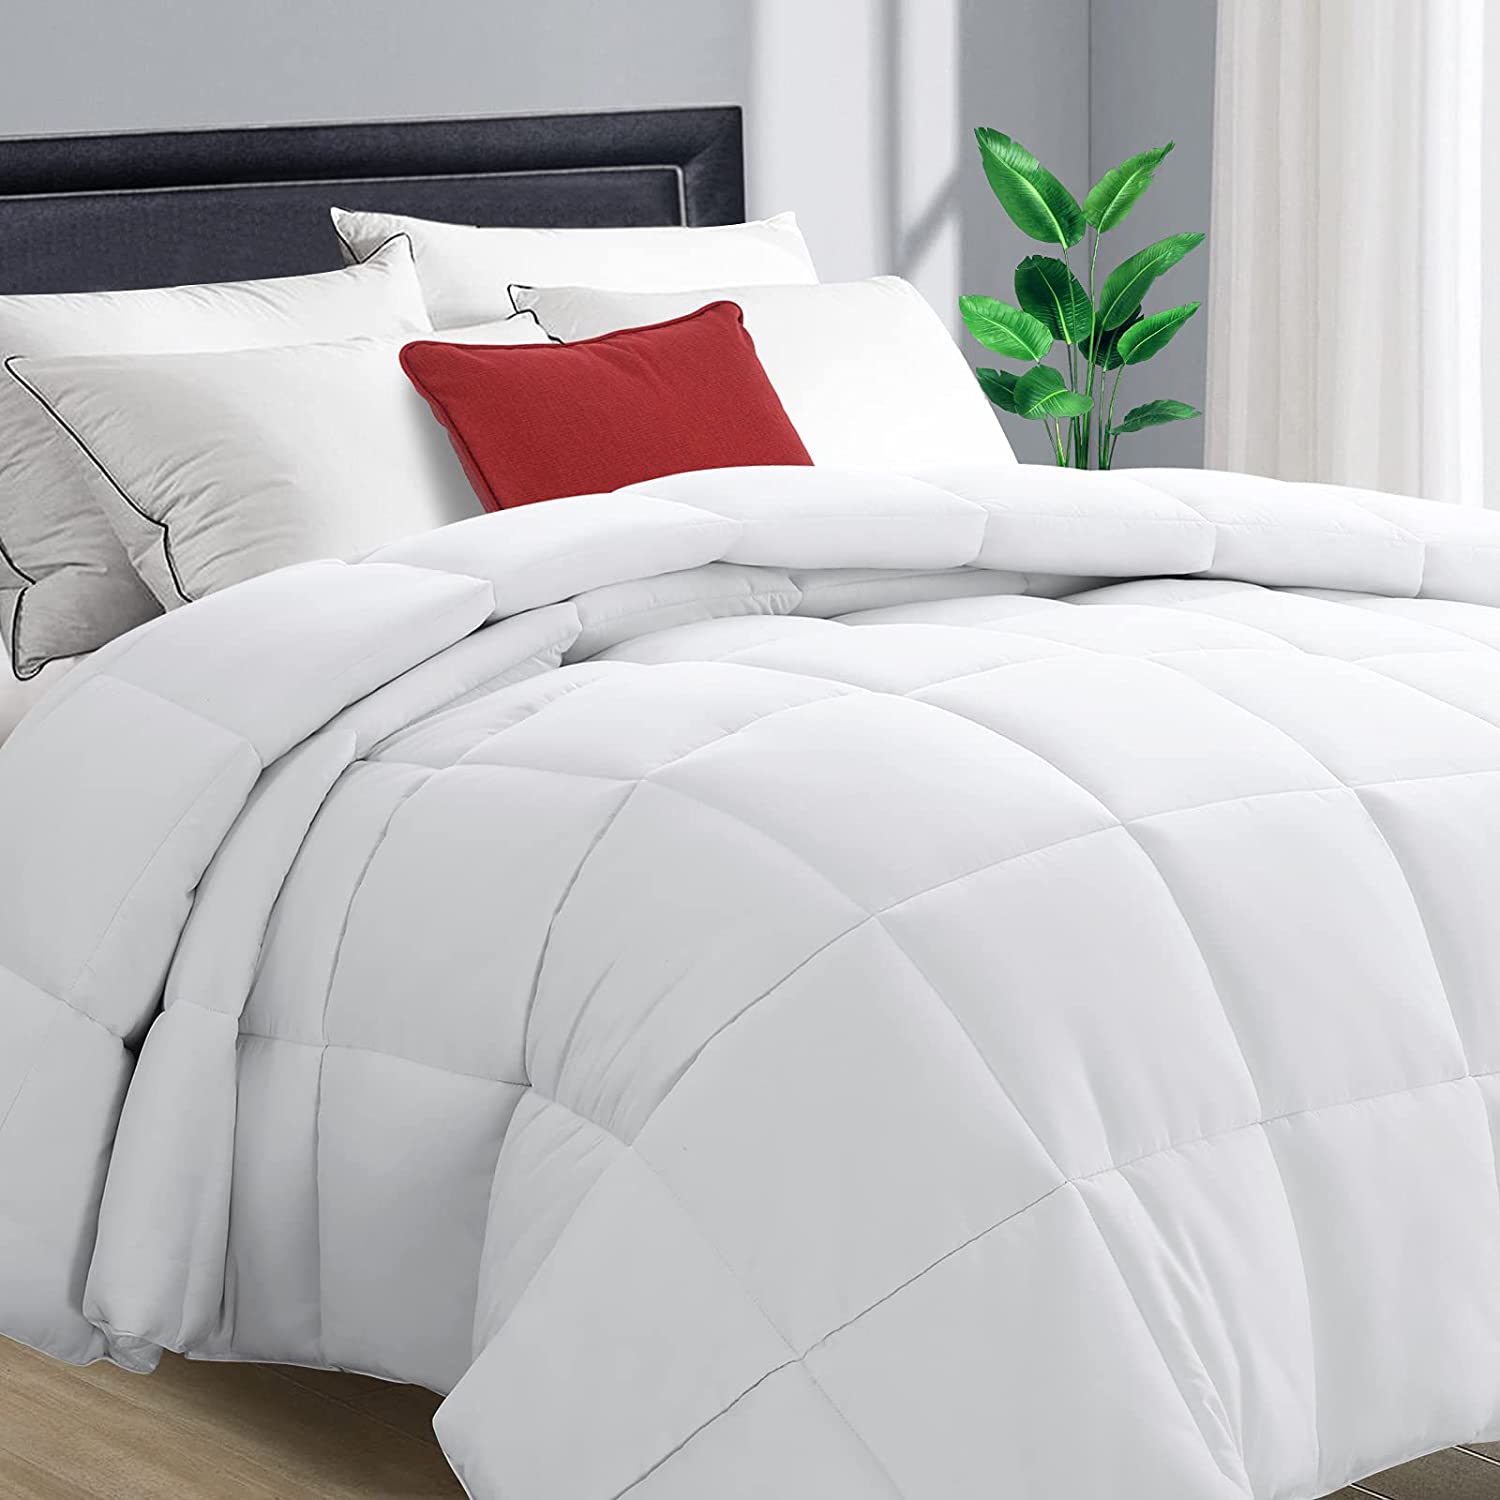 Price:$69.90 Morflys All Season Queen Size Duvet Insert Down Alternative Quilted Comforter,Winter Summer Soft Warm Fluffy Breathable Lightweight with Corner Ties,Machine Washable,White,88x88 inches : Home & Kitchen